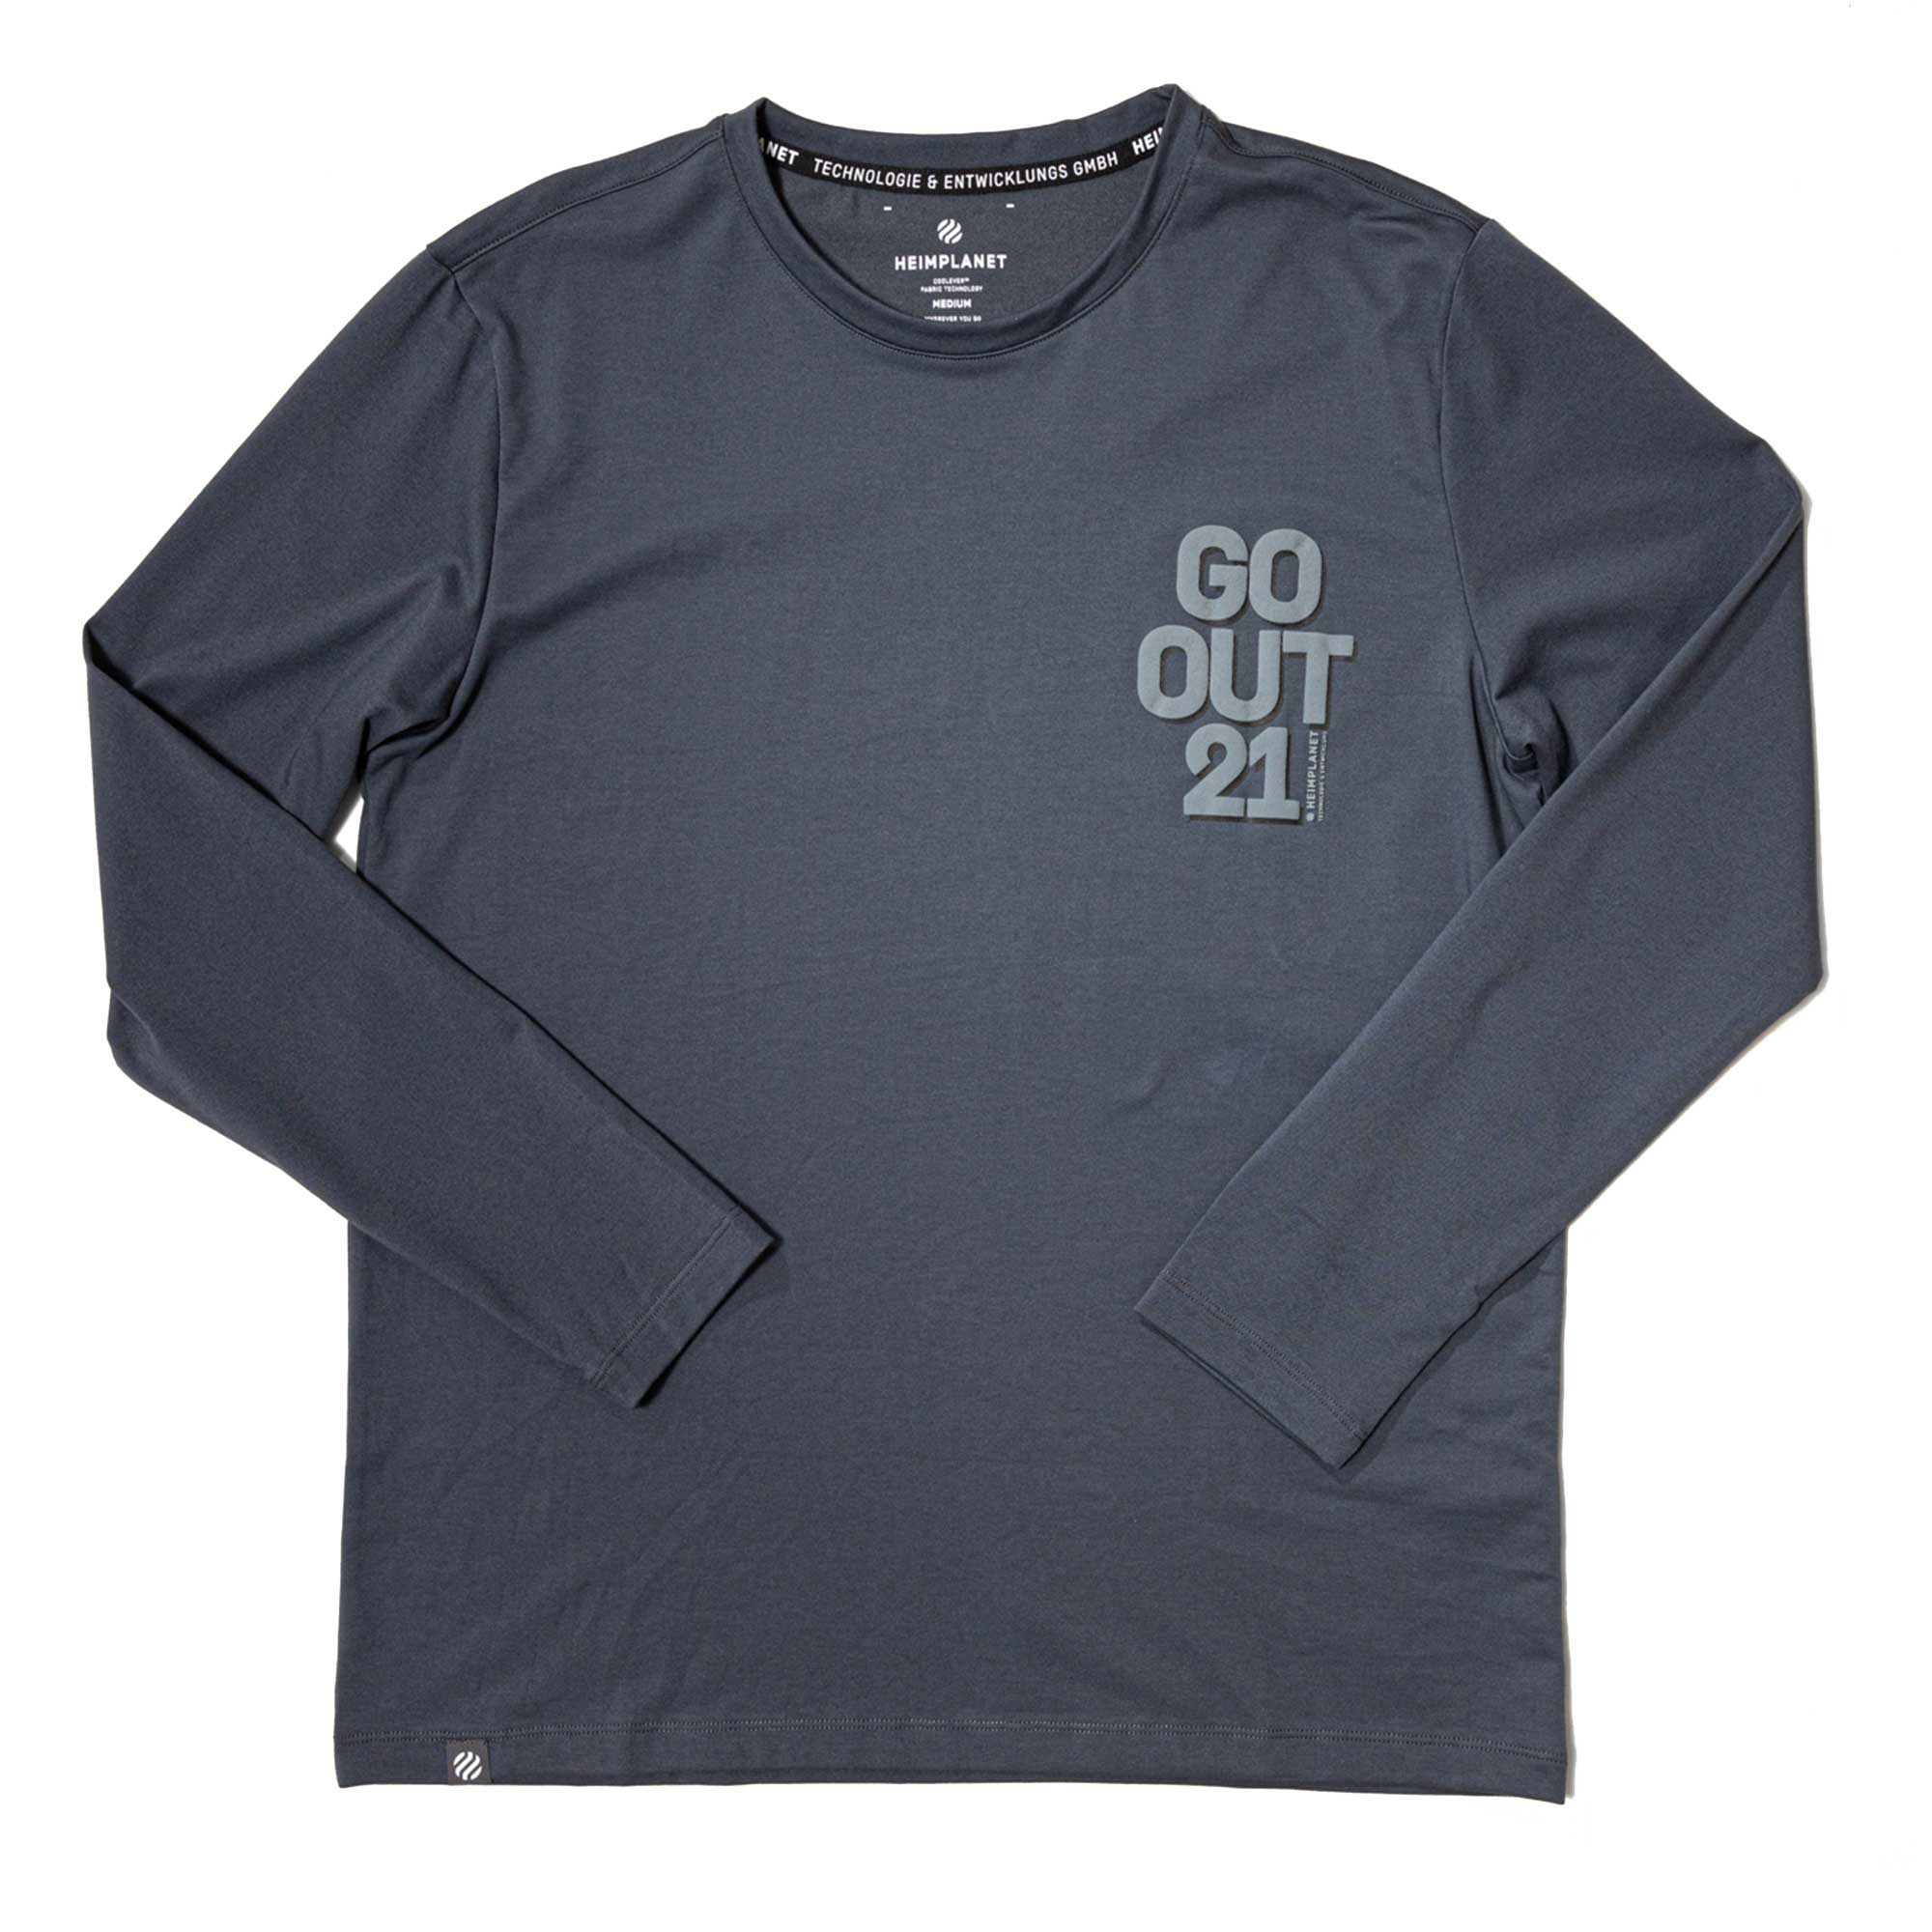 COOLEVER Longsleeve Go Out 21, dark grey